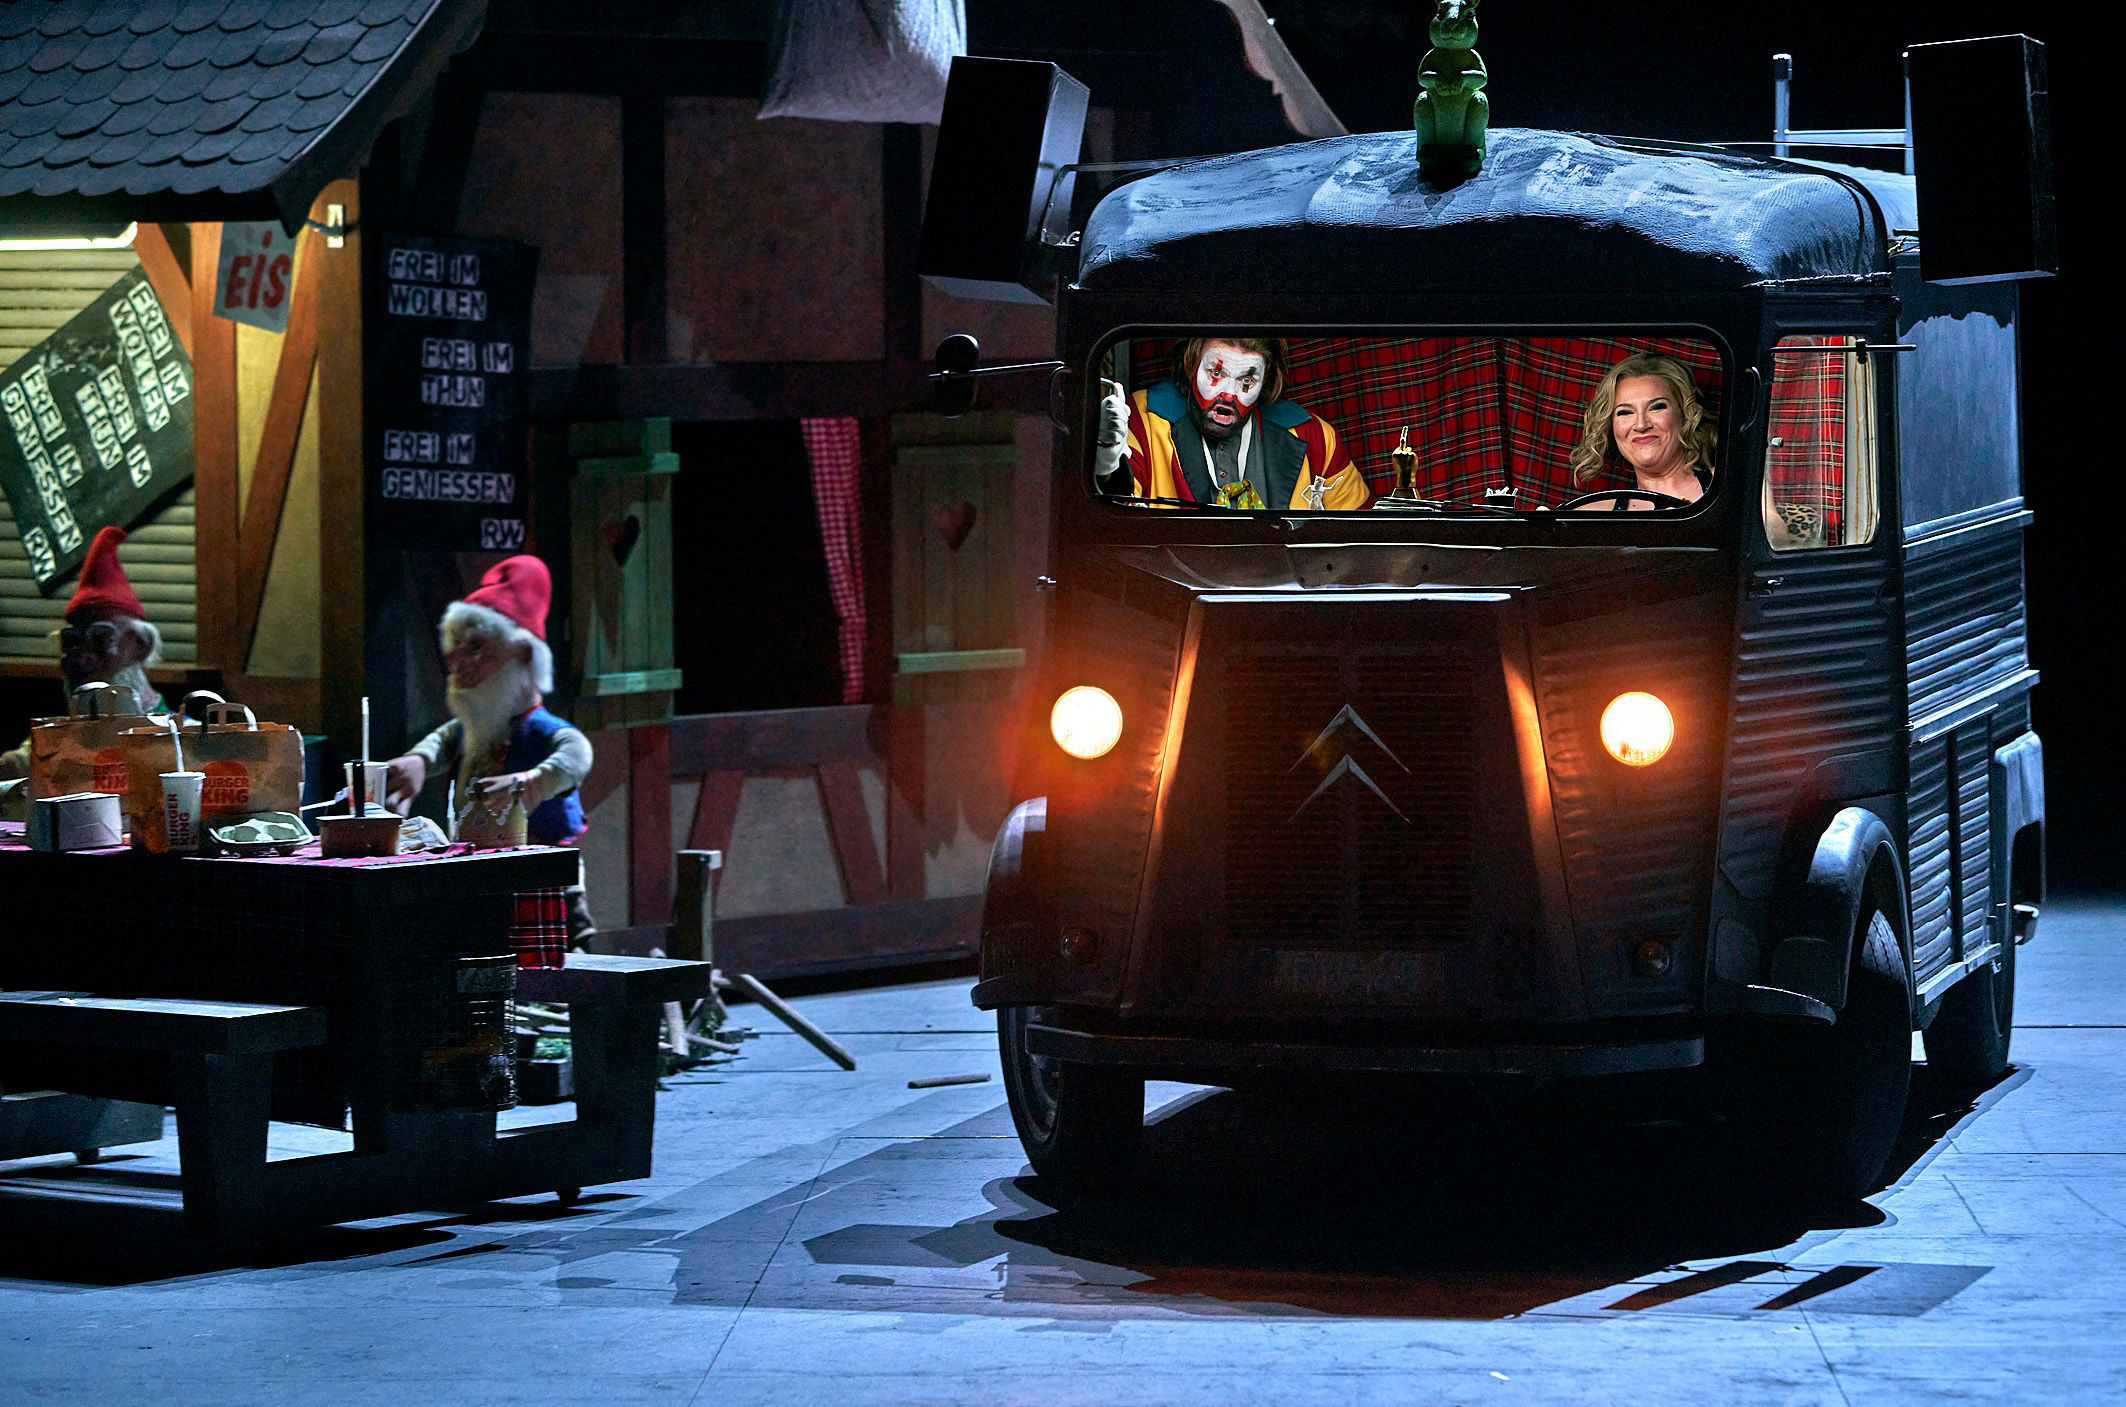 Tenor Klaus Florian Vogt and mezzo-soprano Ekaterina Gubanova, driving a Citroen van, in rehearsal for a 2023 revival of Tobias Kratzer’s production of Wagner’s “Tannhäuser” at the Bayreuth Festival in Germany. Photo: Enrico Nawrath/Bayreuth Festival via AP